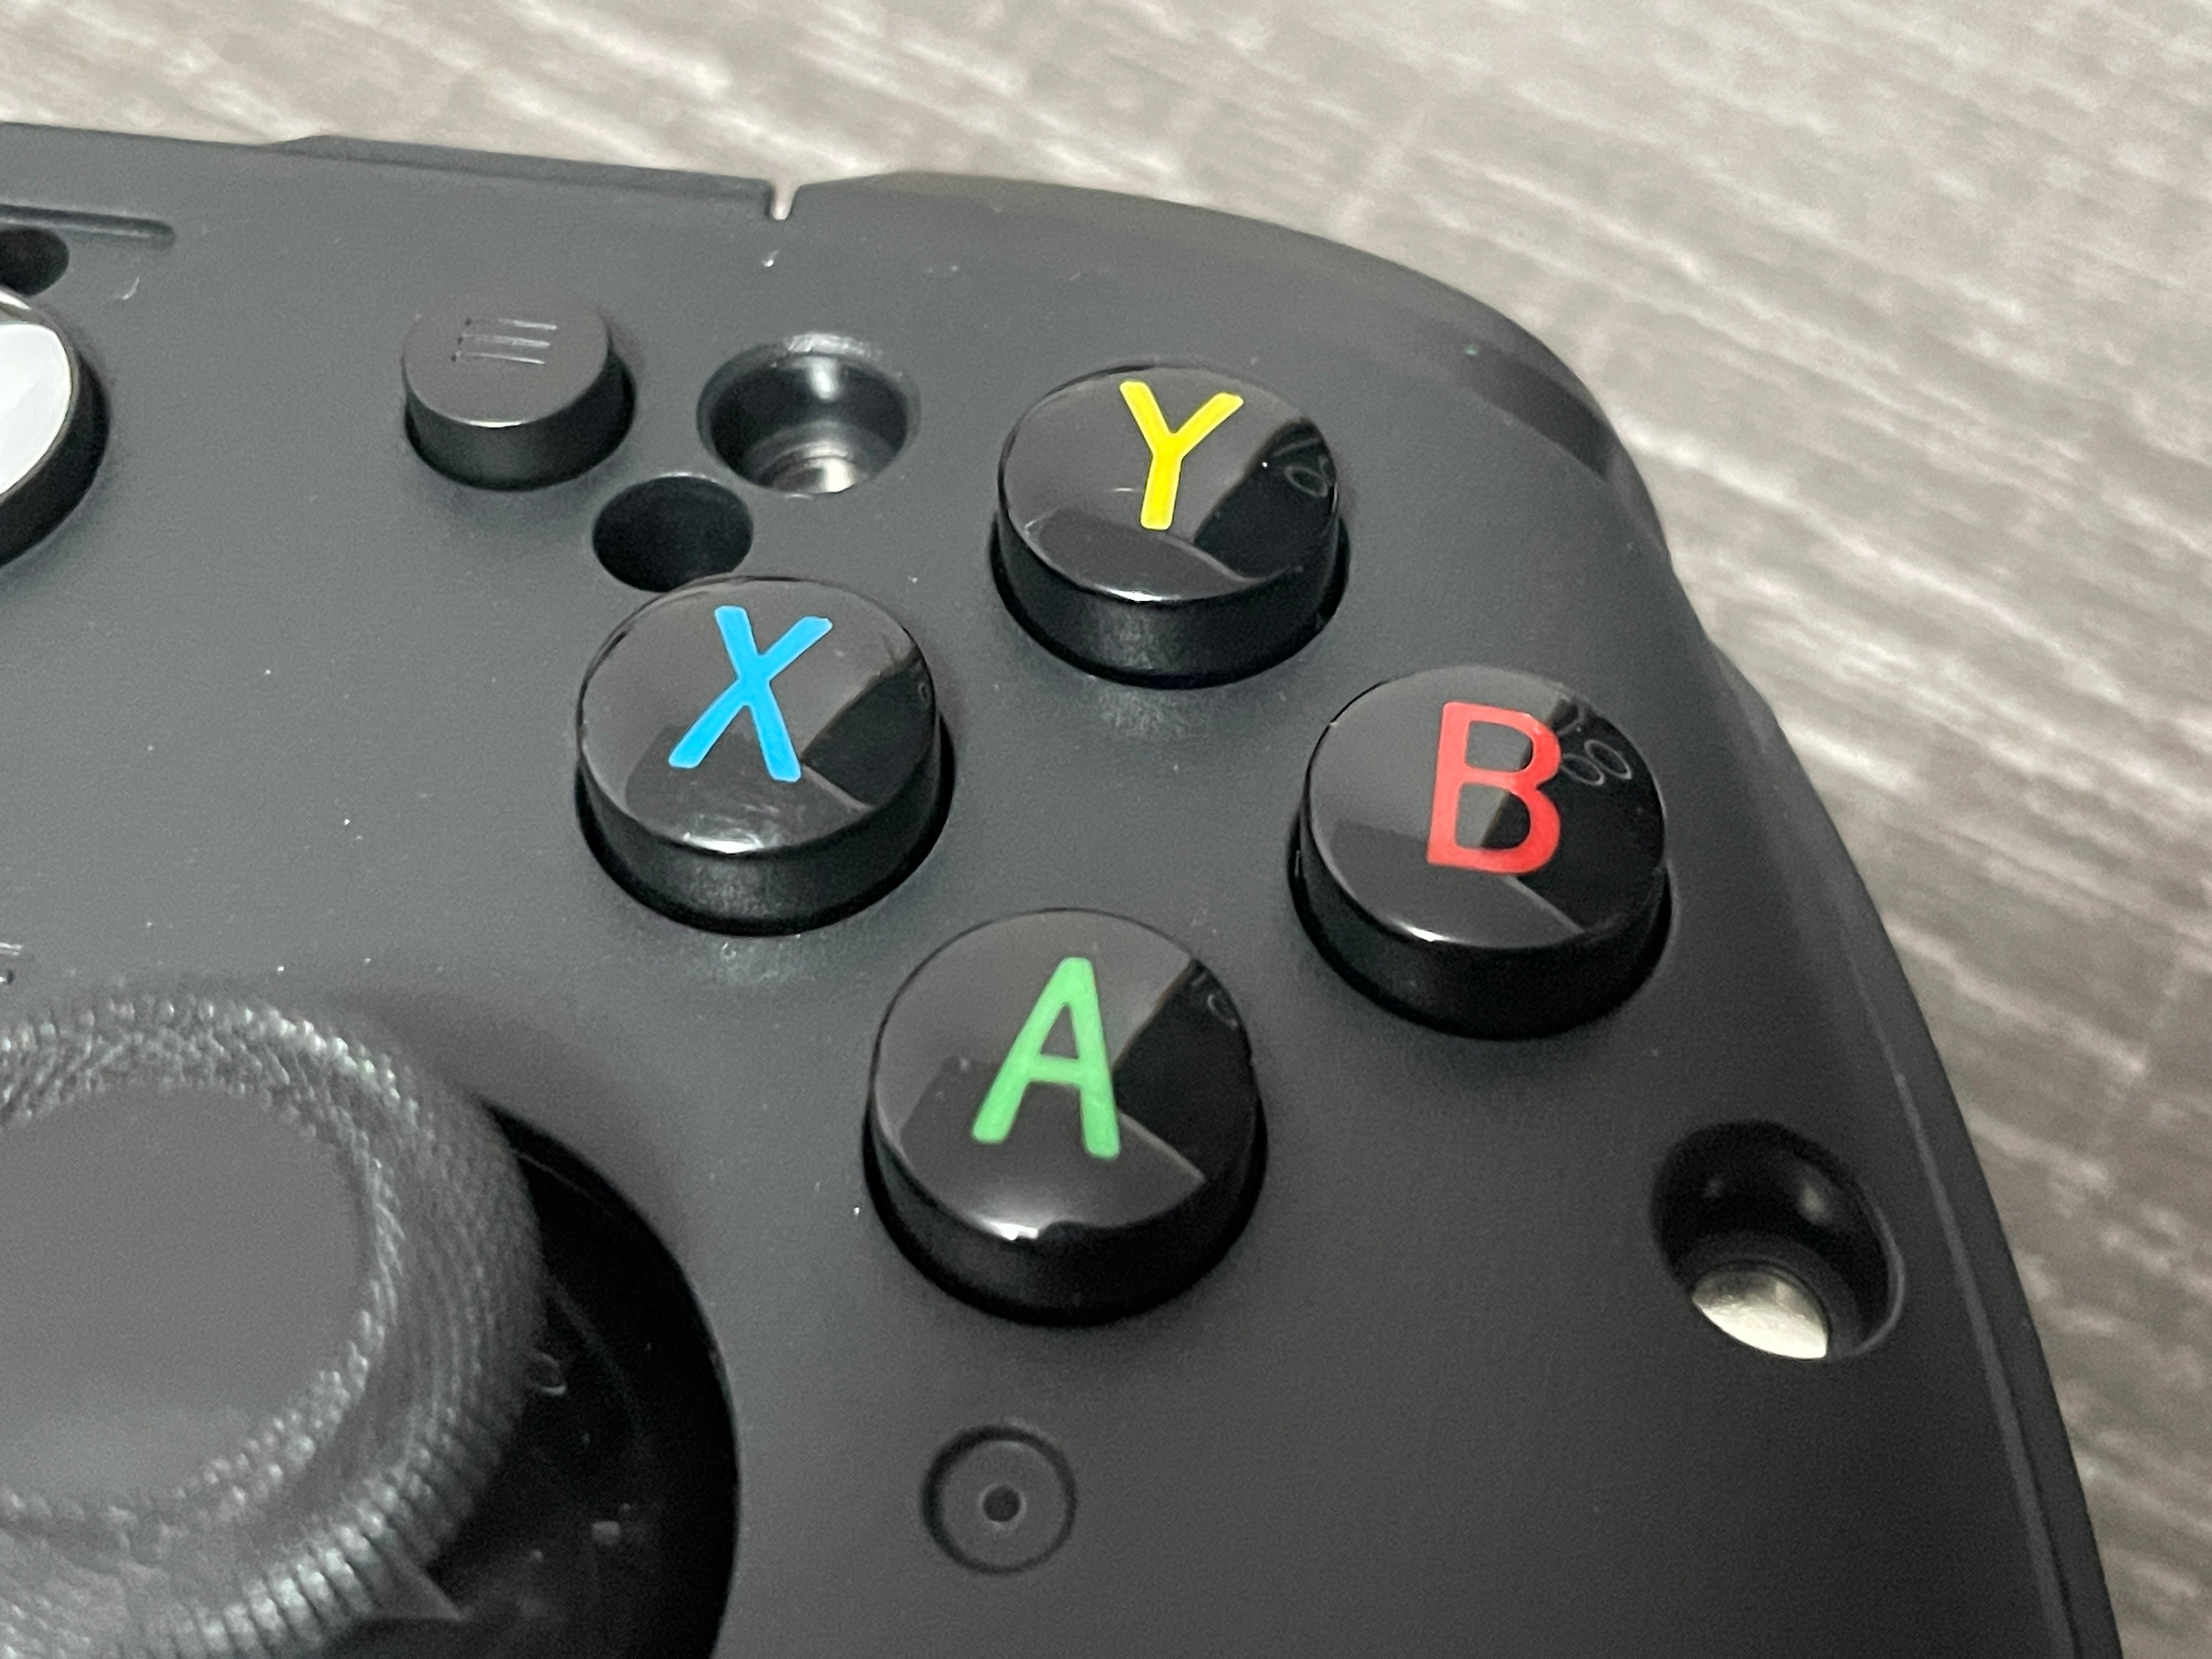 GameSir G7 Wired Gaming Controller Review: Personalize it! – MBReviews